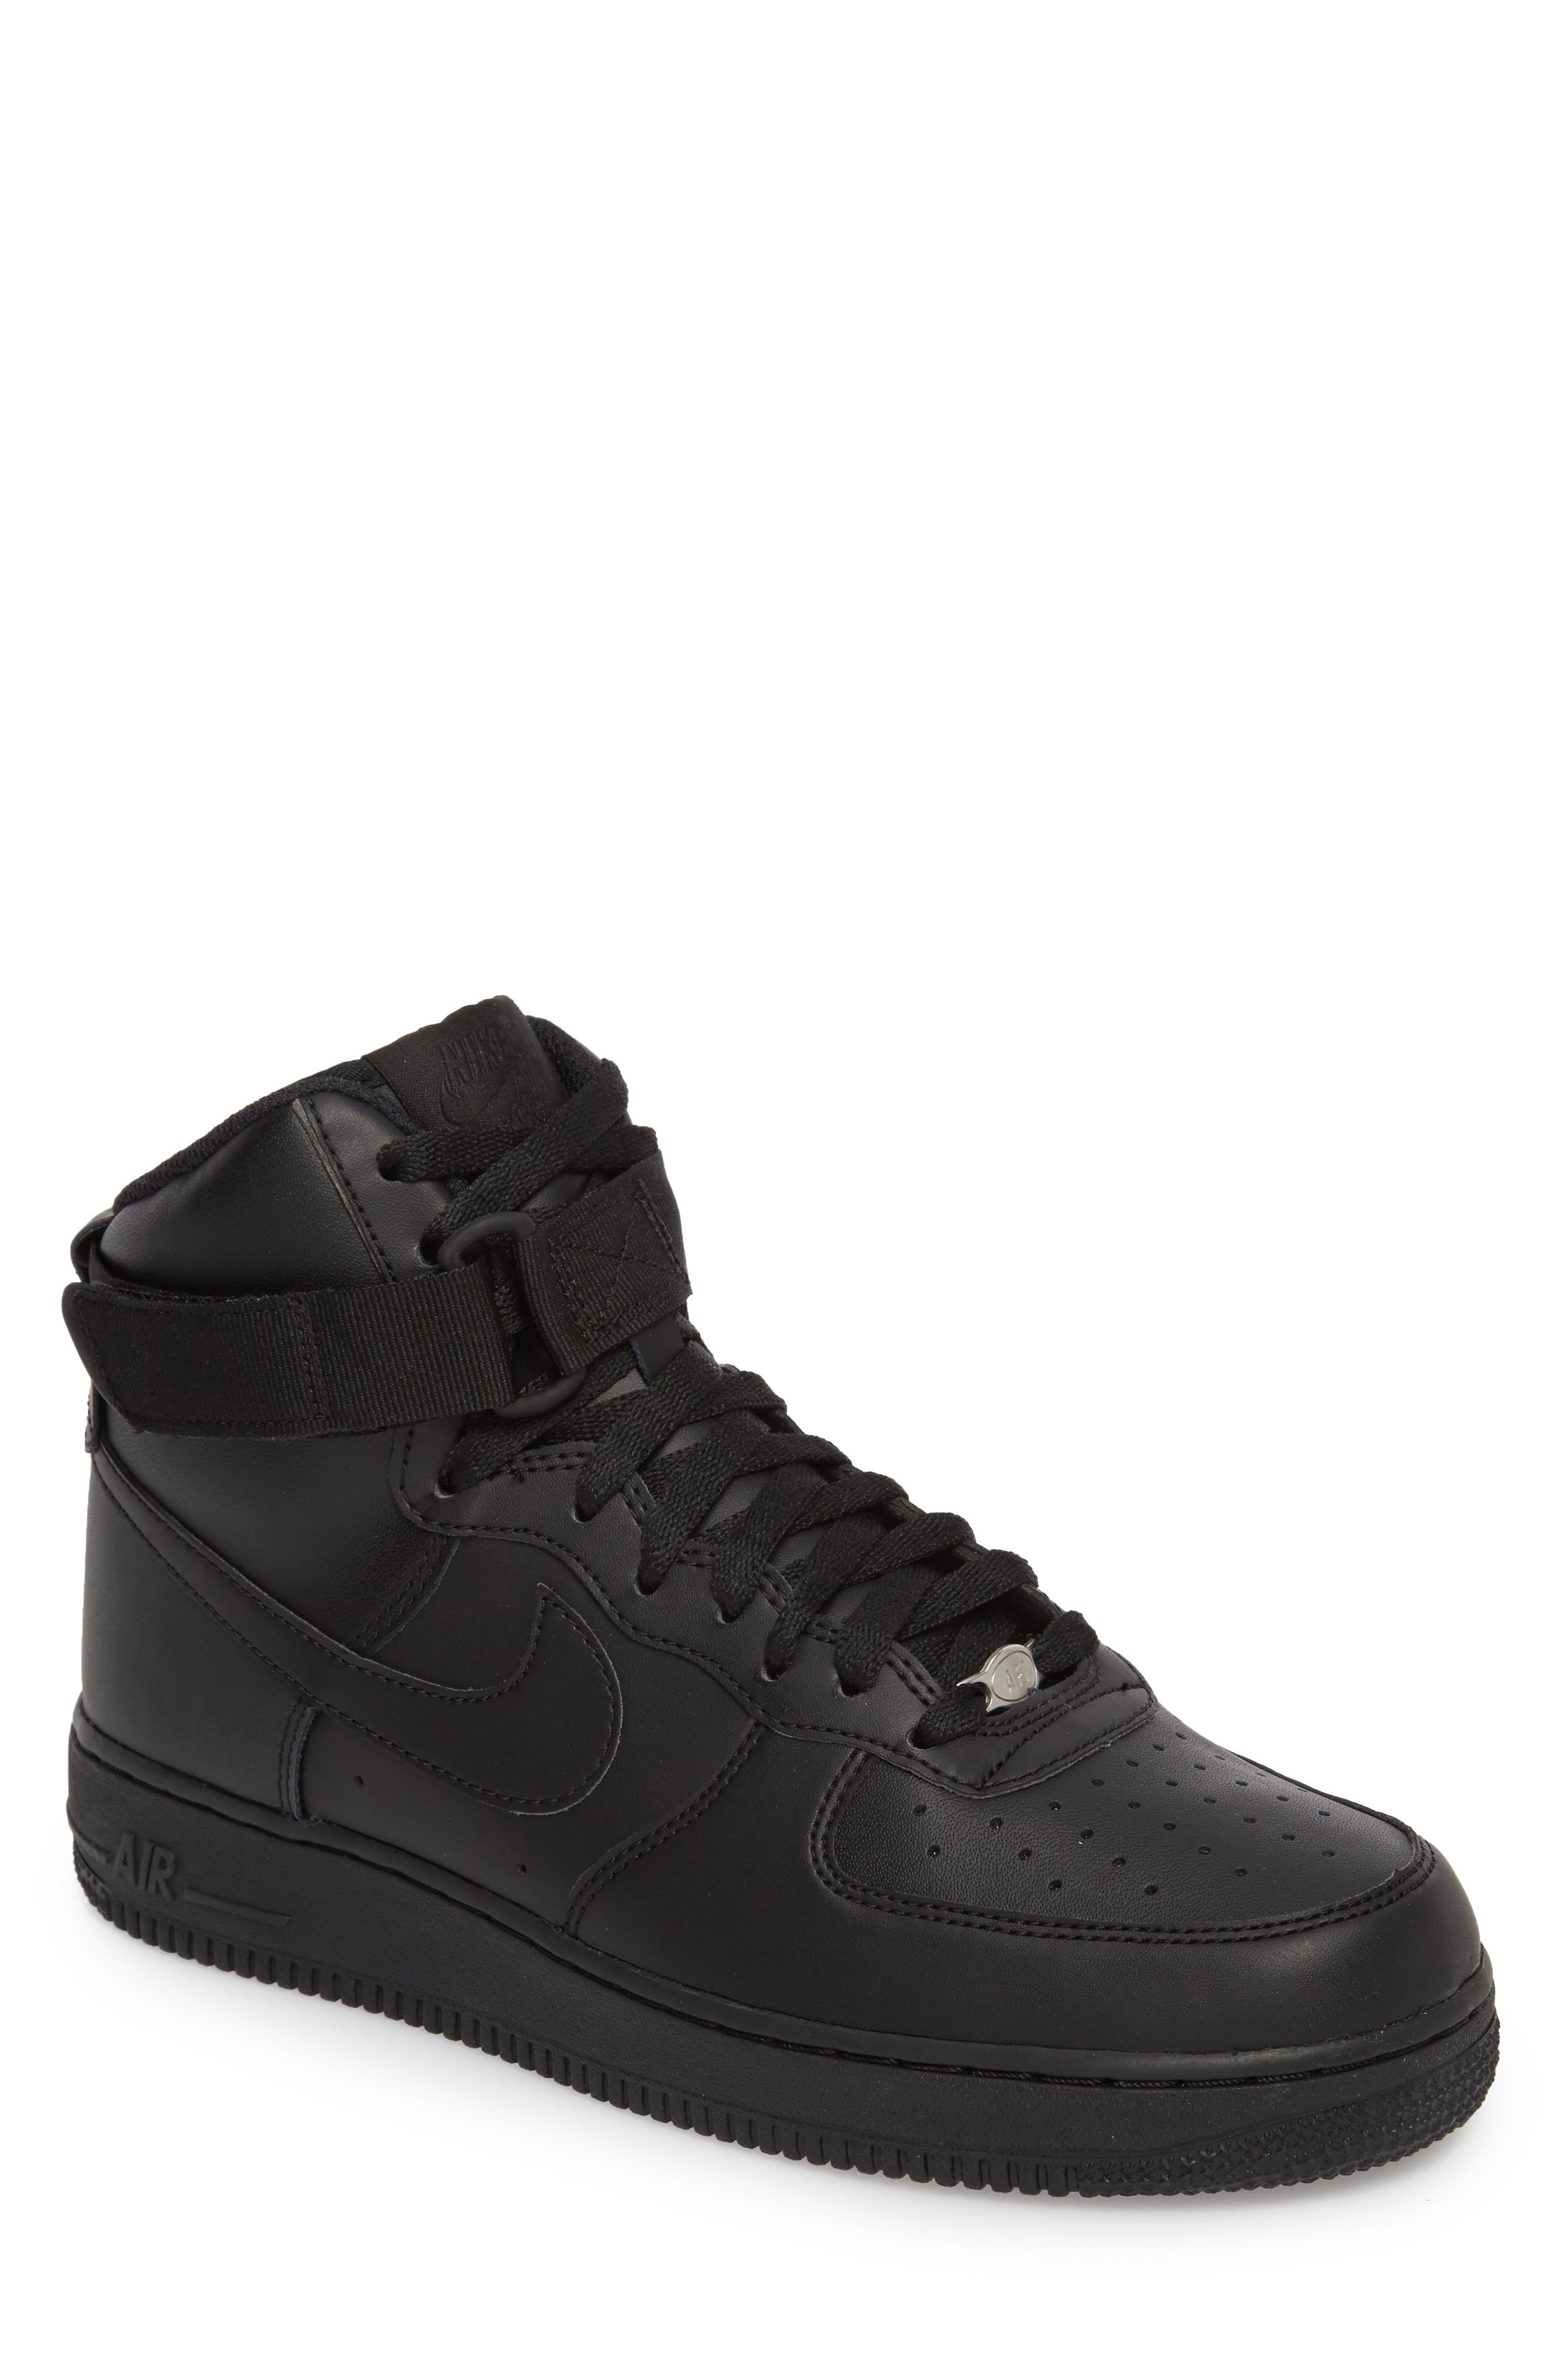 UPC 888409448063 product image for Men's Nike Air Force 1 High '07 Sneaker, Size 11 M - Black | upcitemdb.com